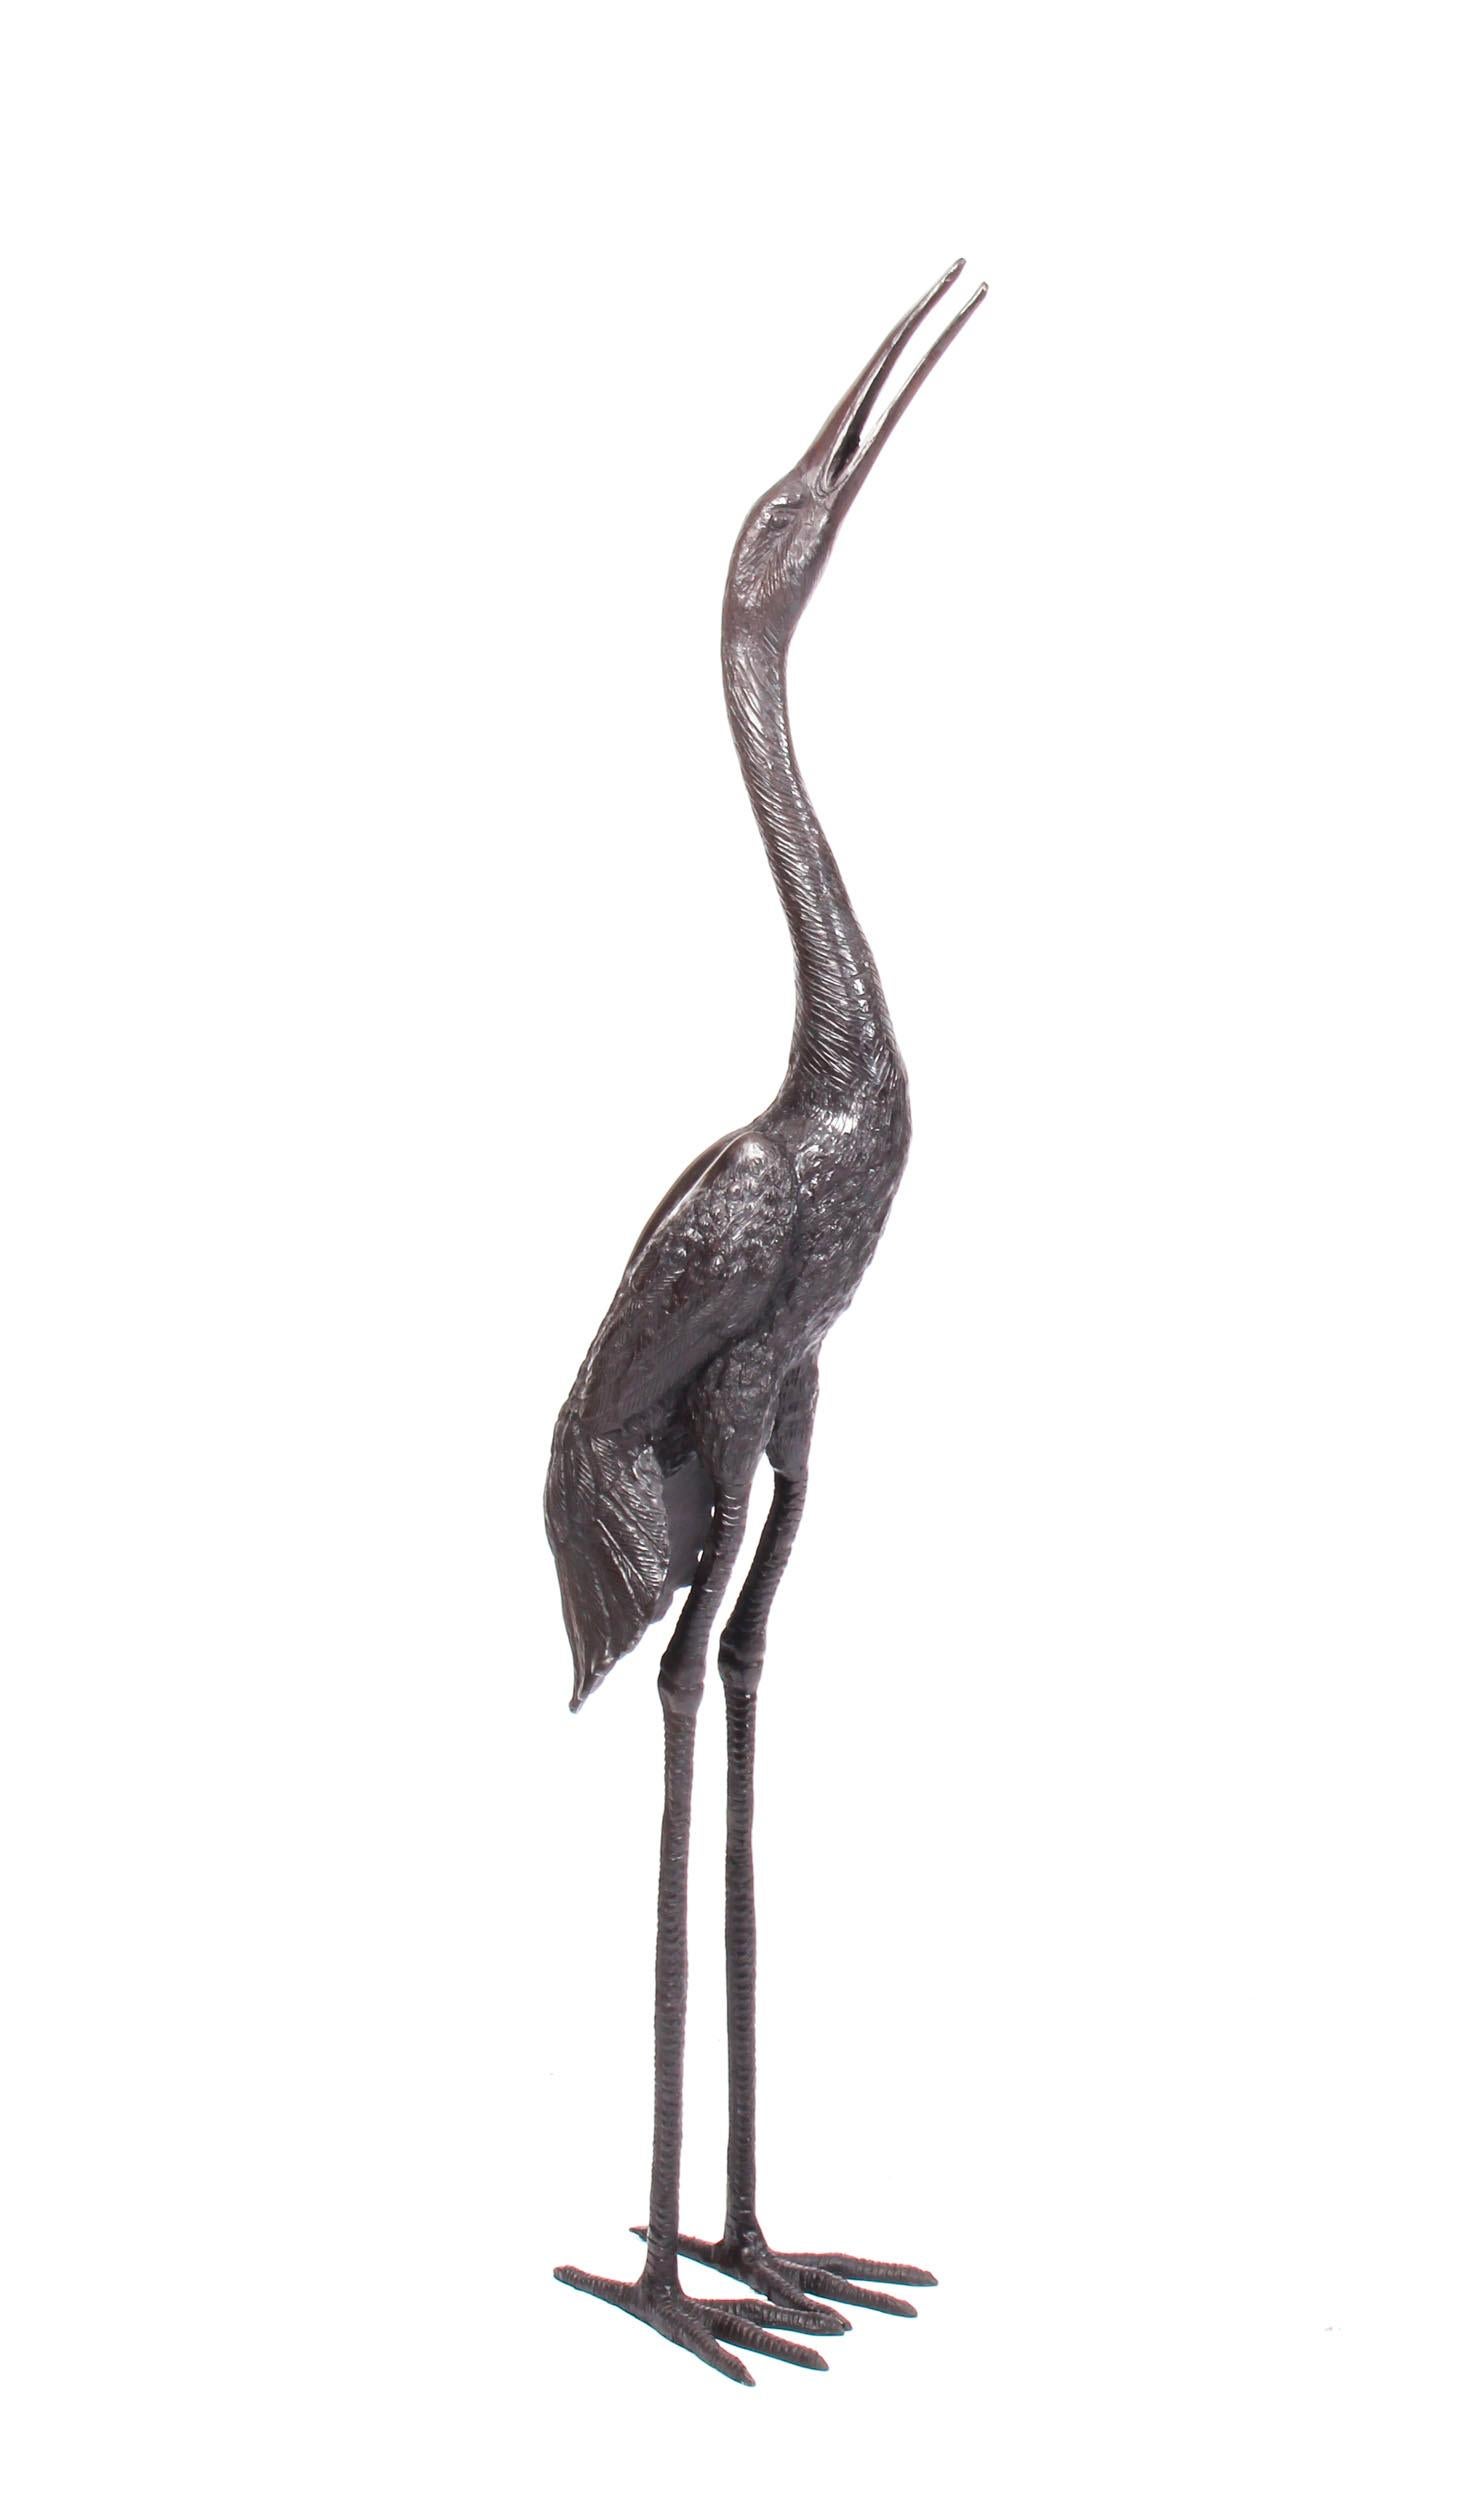 This is a stunning pair of solid bronze cranes dating from the last quarter of the 20th century.

This remarkable bronze pair features the two birds in a highly life-like fashion - with their characteristic long legs, tall bodies, and the sharp,